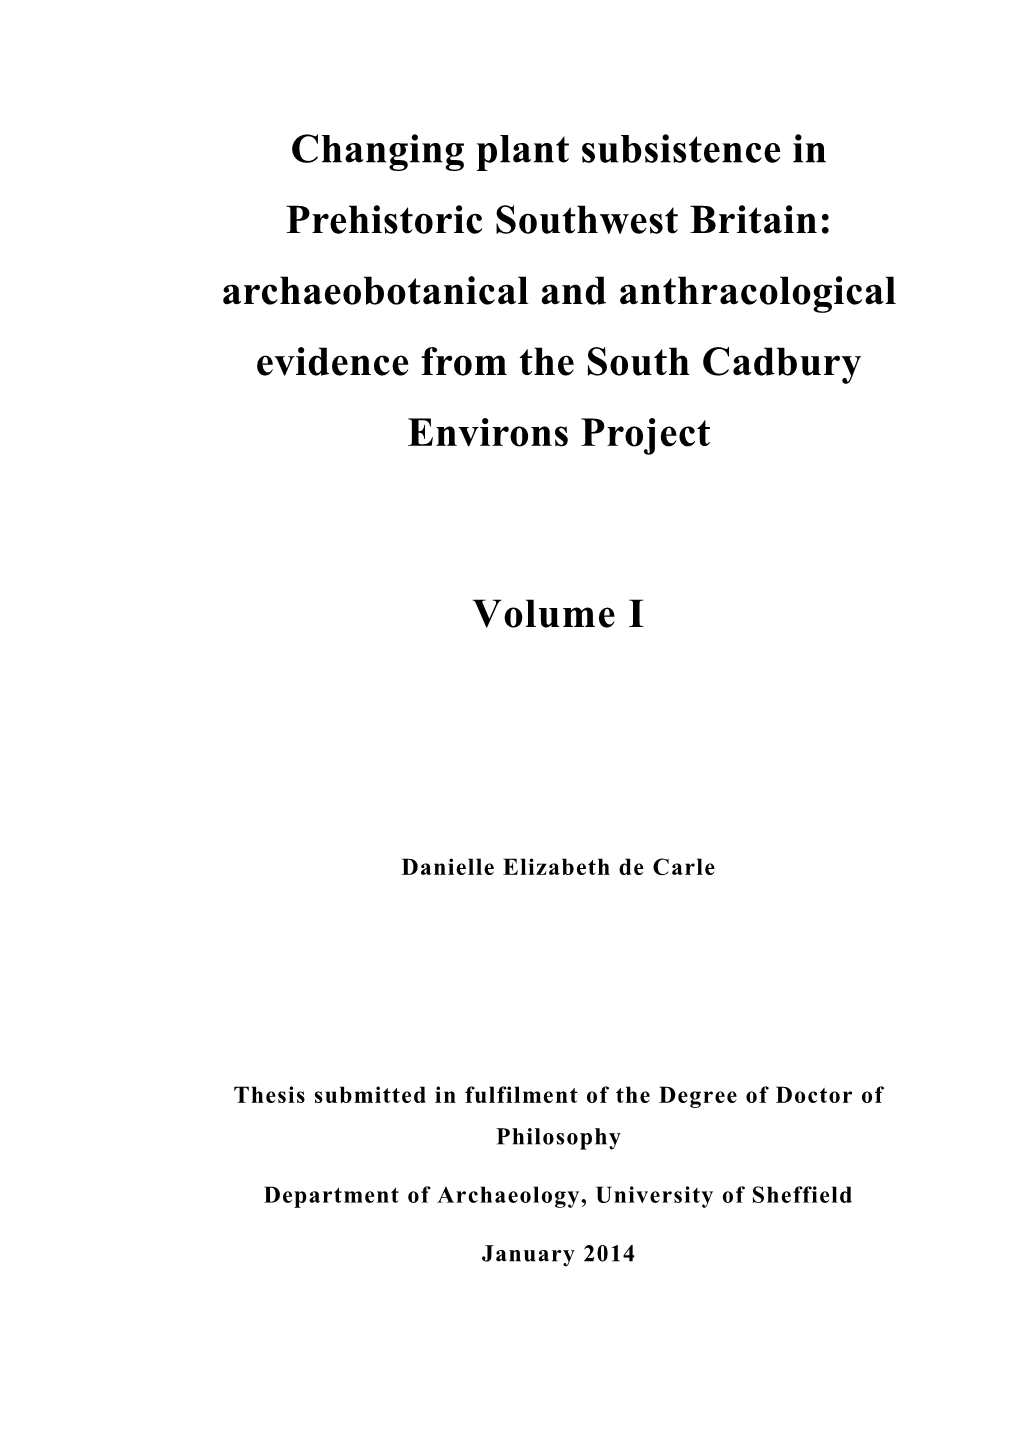 Changing Plant Subsistence in Prehistoric Southwest Britain: Archaeobotanical and Anthracological Evidence from the South Cadbury Environs Project